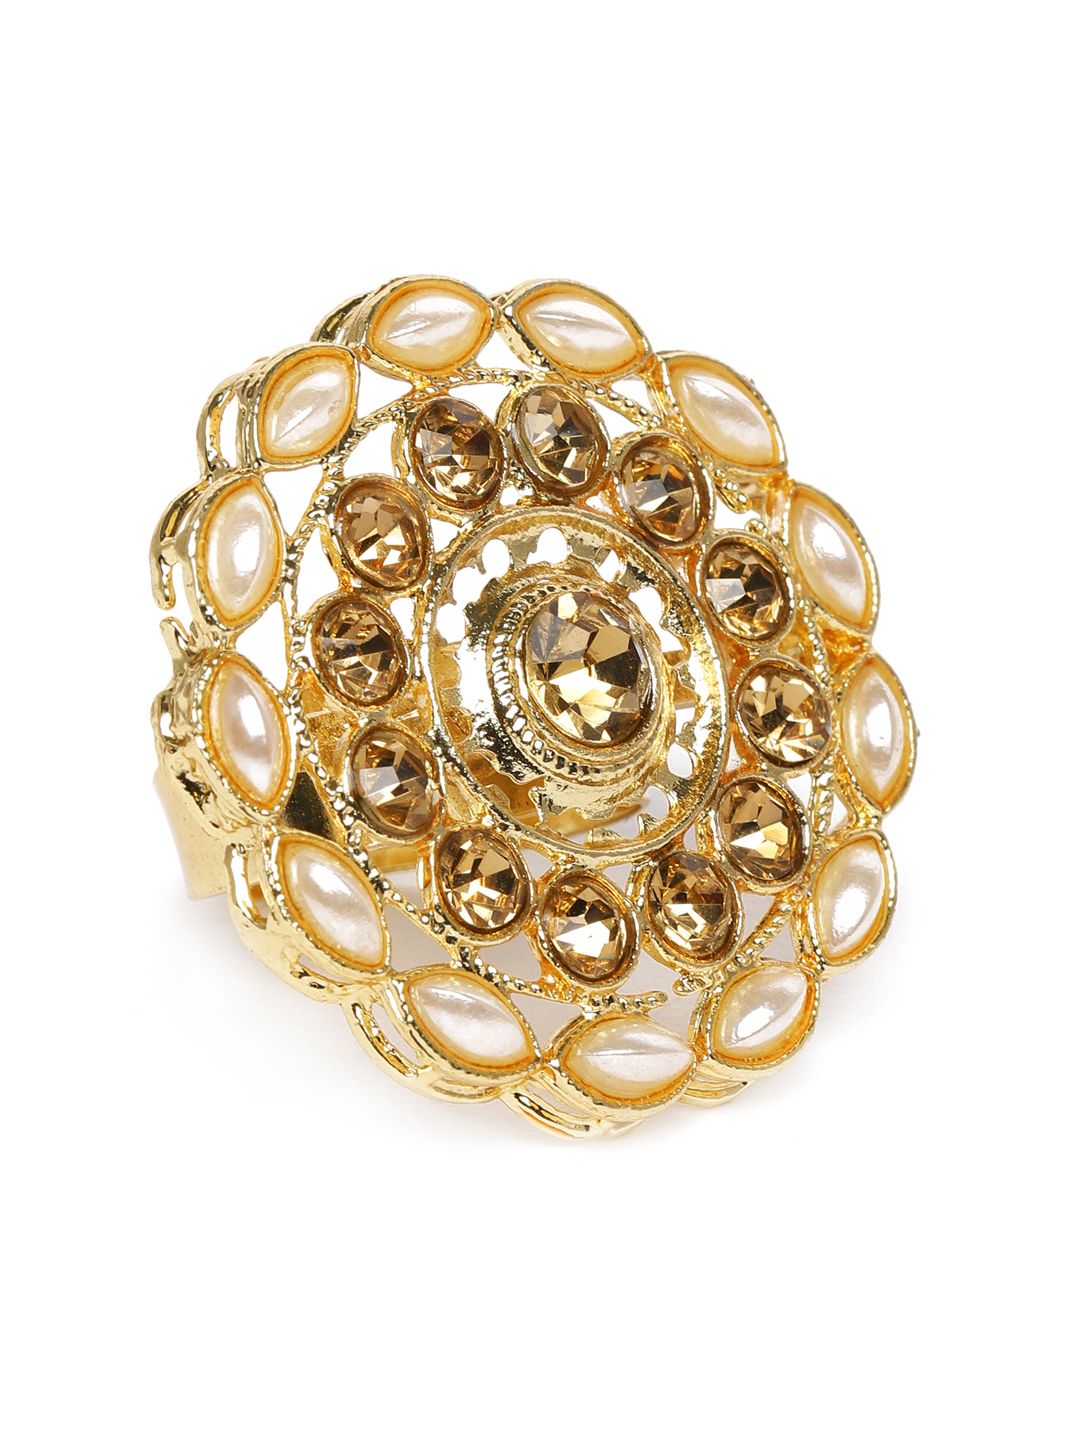 Kord Store Gold-Plated Kundan Studded Circular Adjustable Finger Ring Price in India